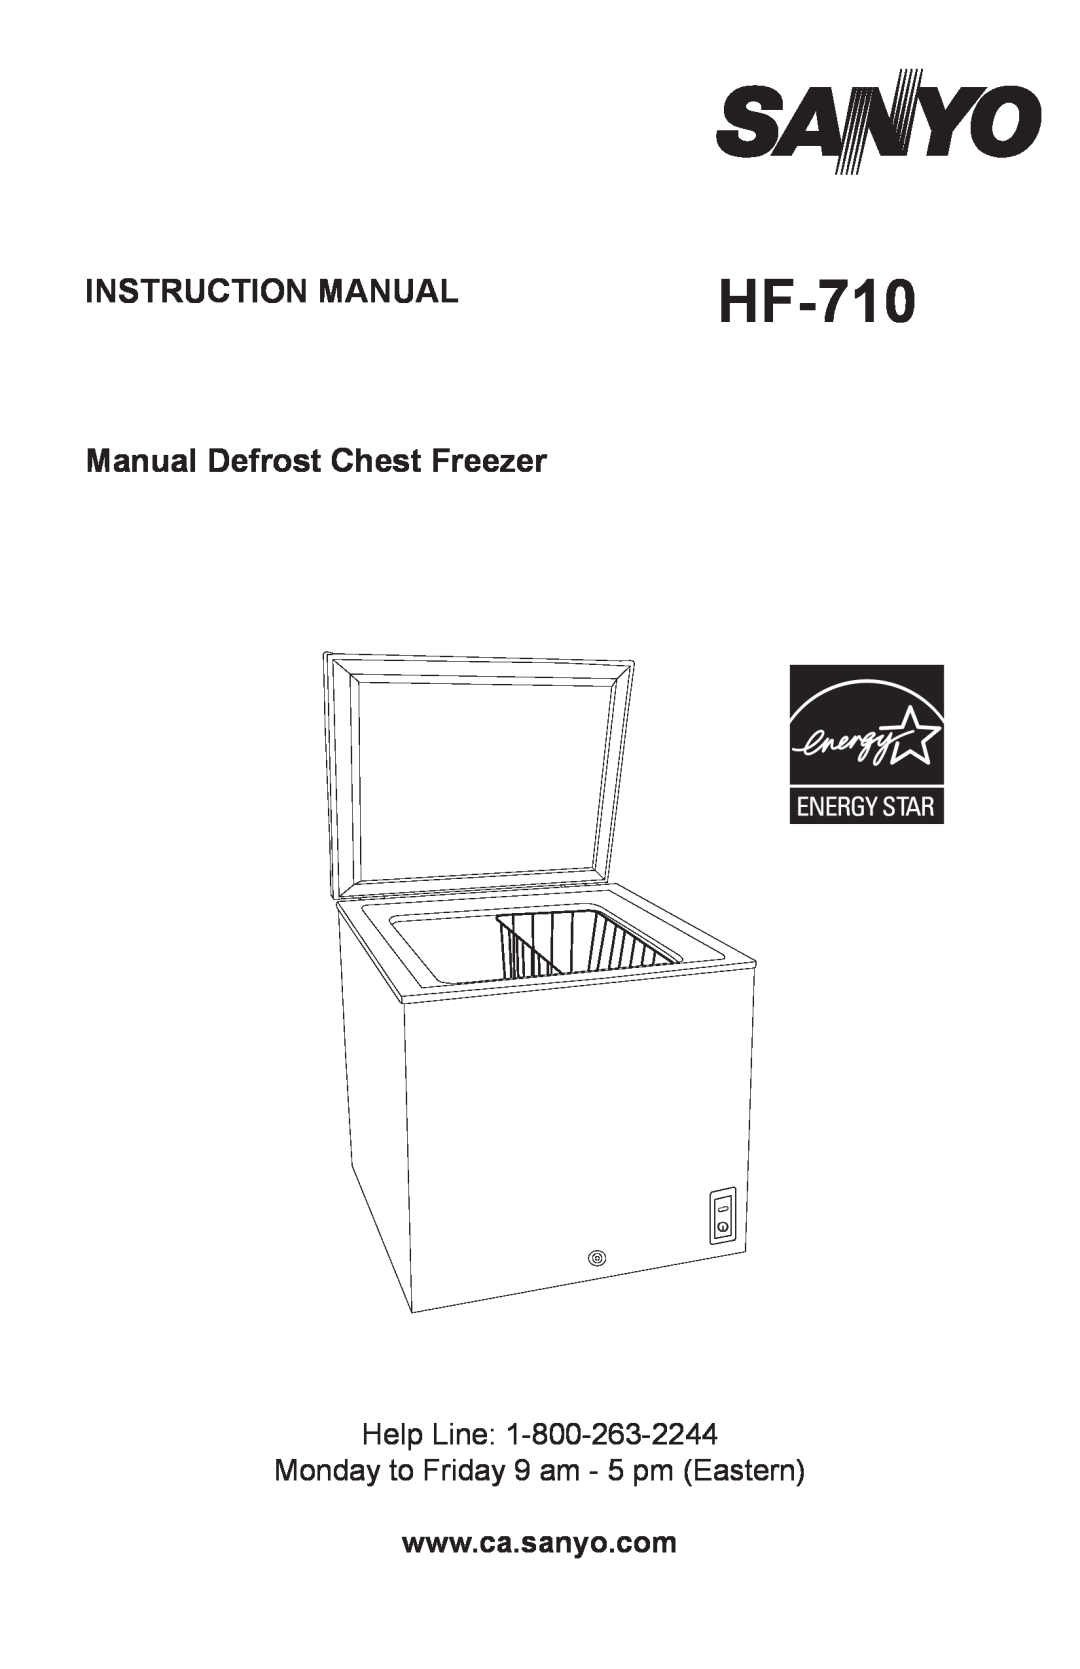 Sanyo HF-710 instruction manual Manual Defrost Chest Freezer, Help Line Monday to Friday 9 am - 5 pm Eastern 